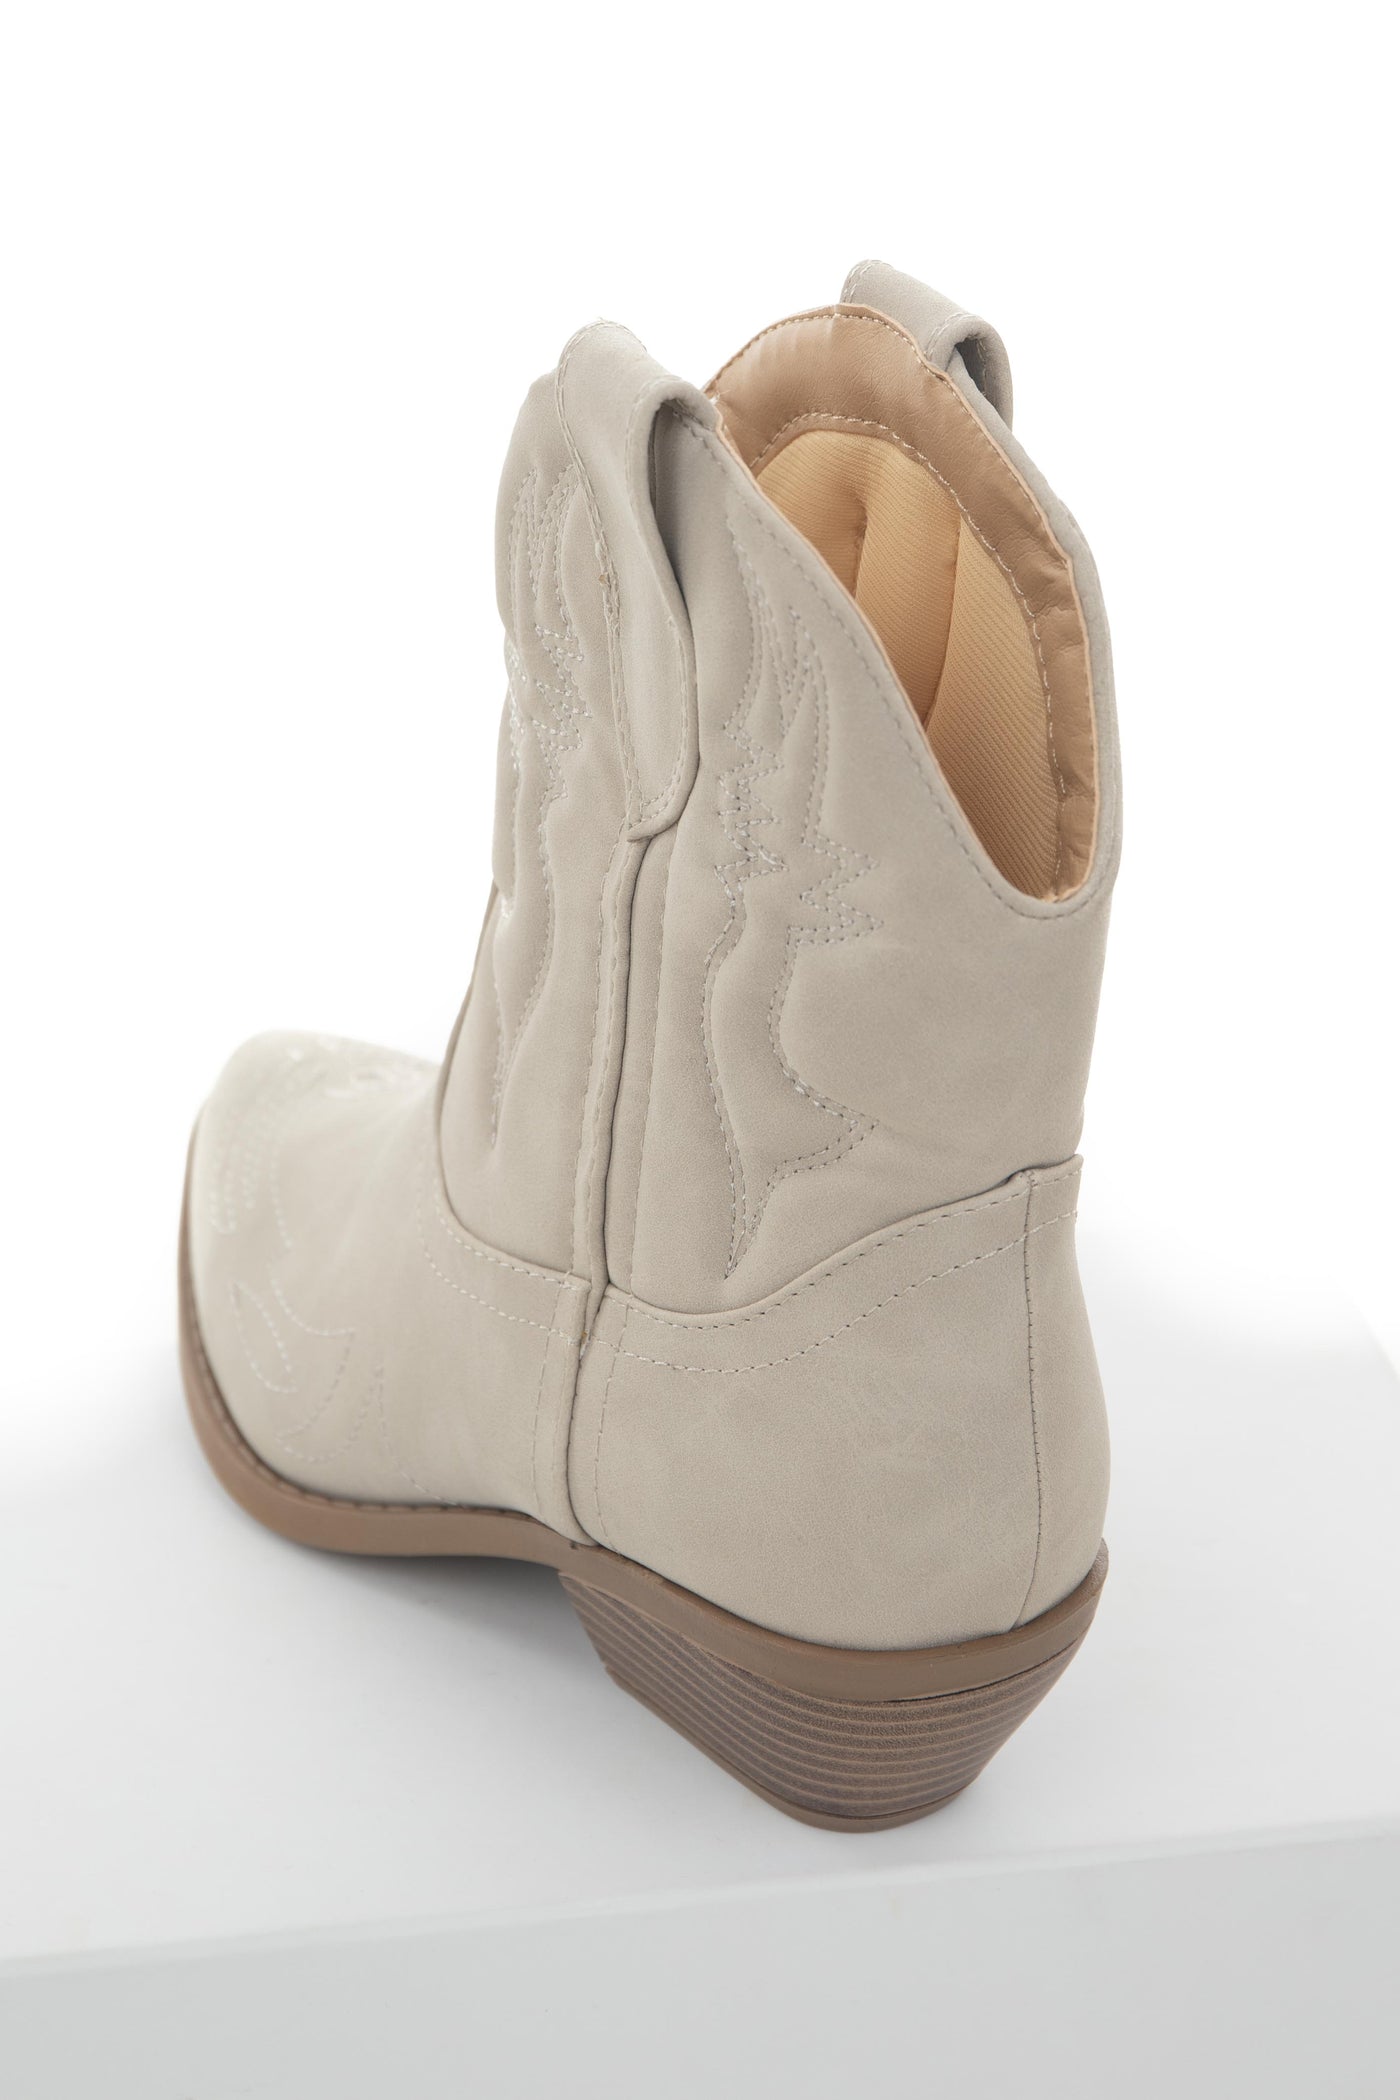 Oatmeal Western Style Pointed Toe Booties